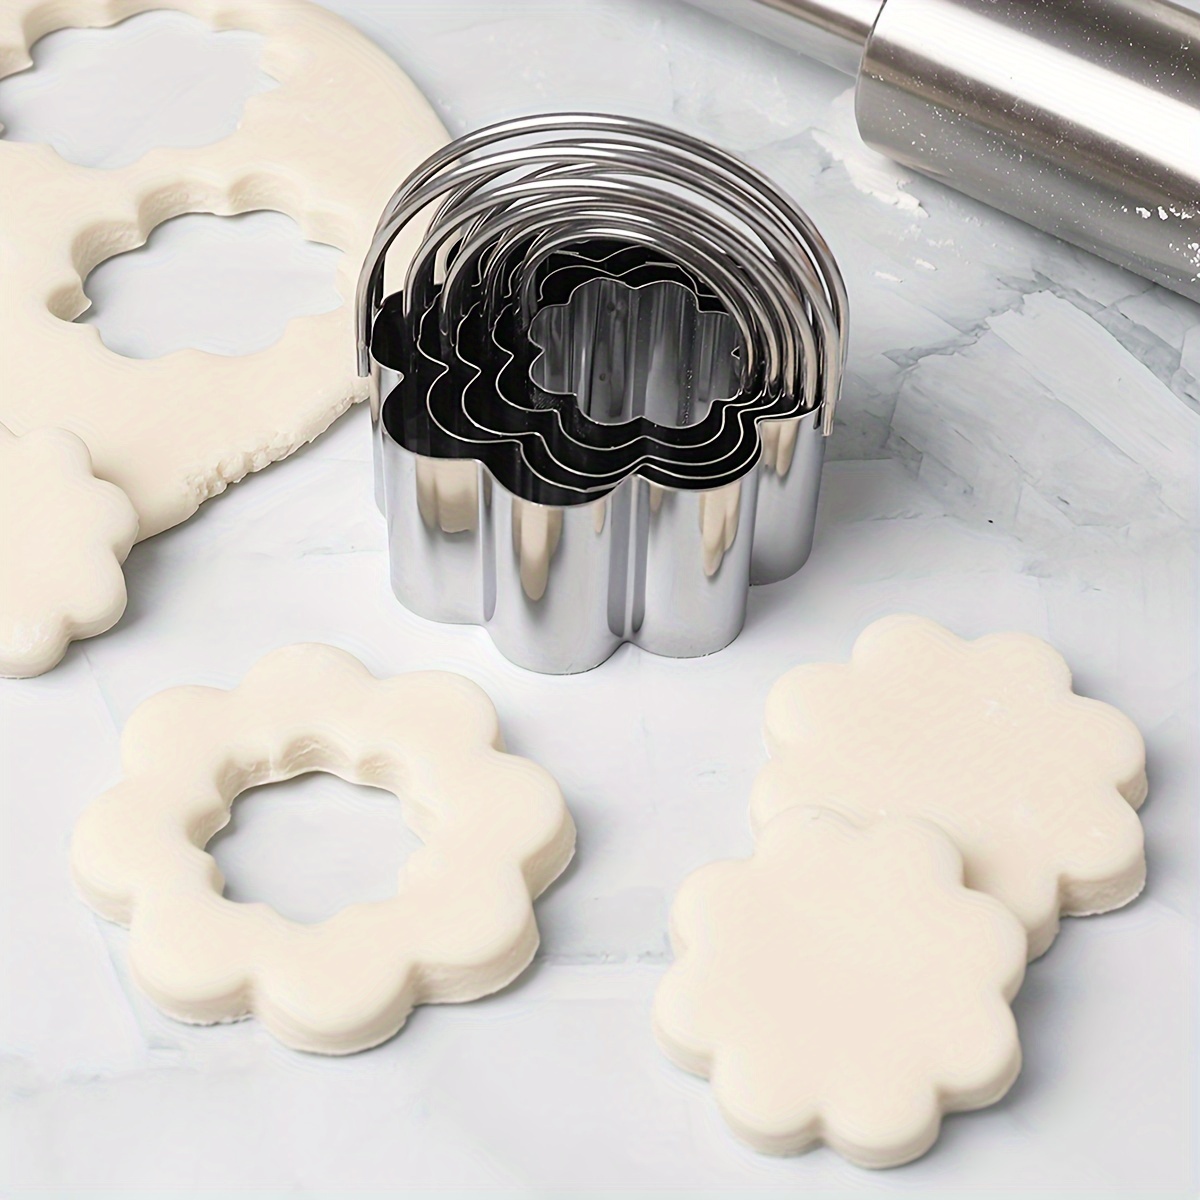 5pcs flower shaped cookie cutters plum blossom stainless steel pastry cutter set biscuit molds baking tools kitchen accessories